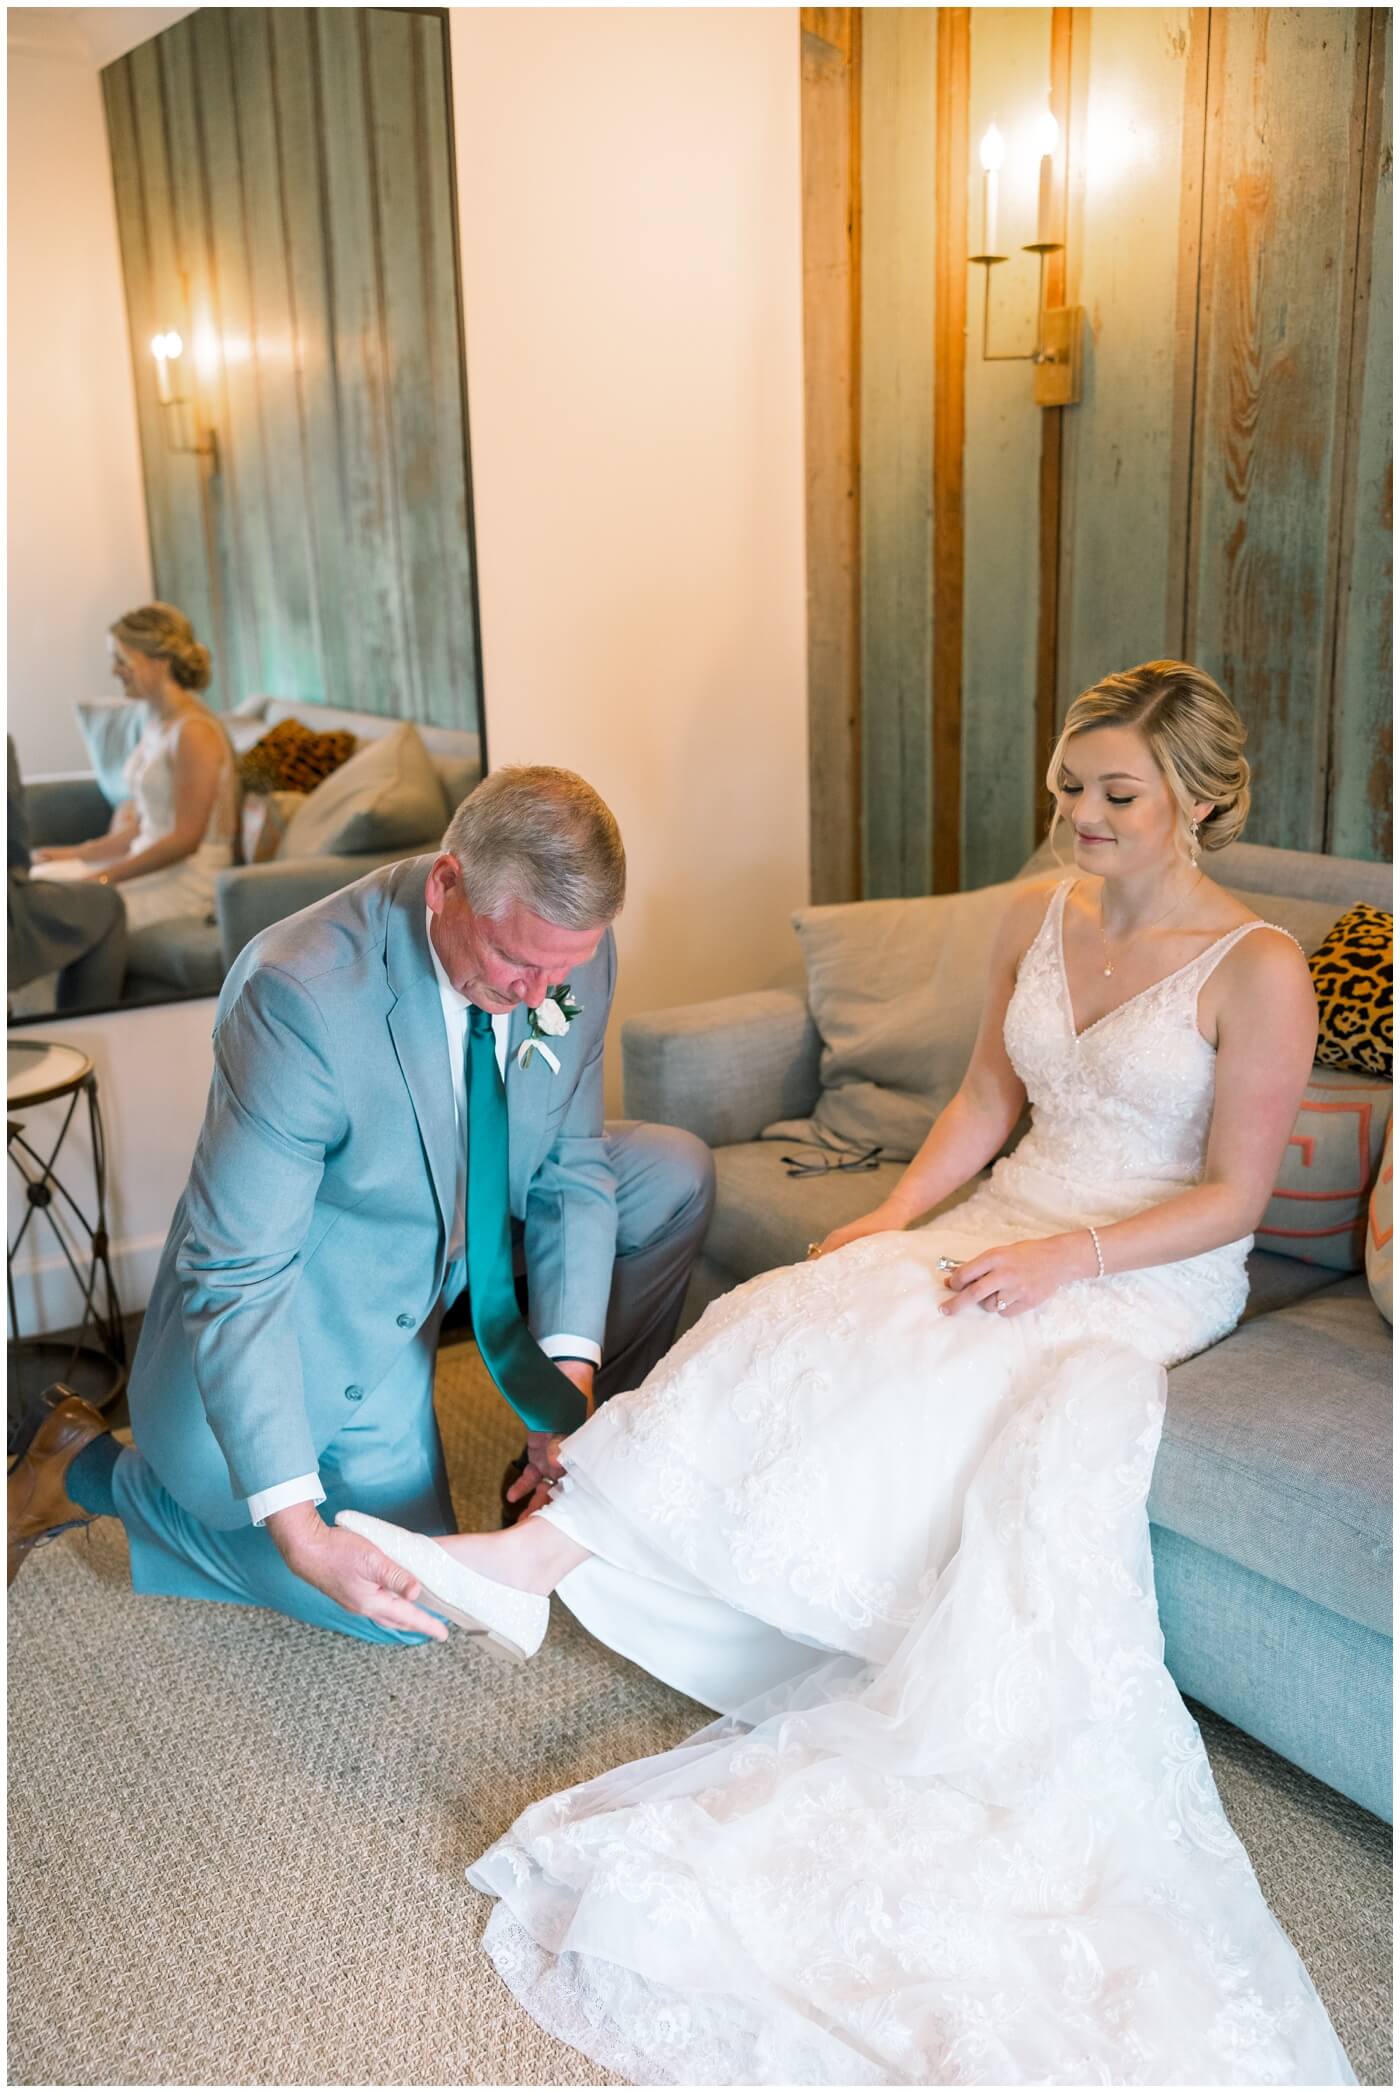 The brides dad helps his daughter put her wedding shoes on